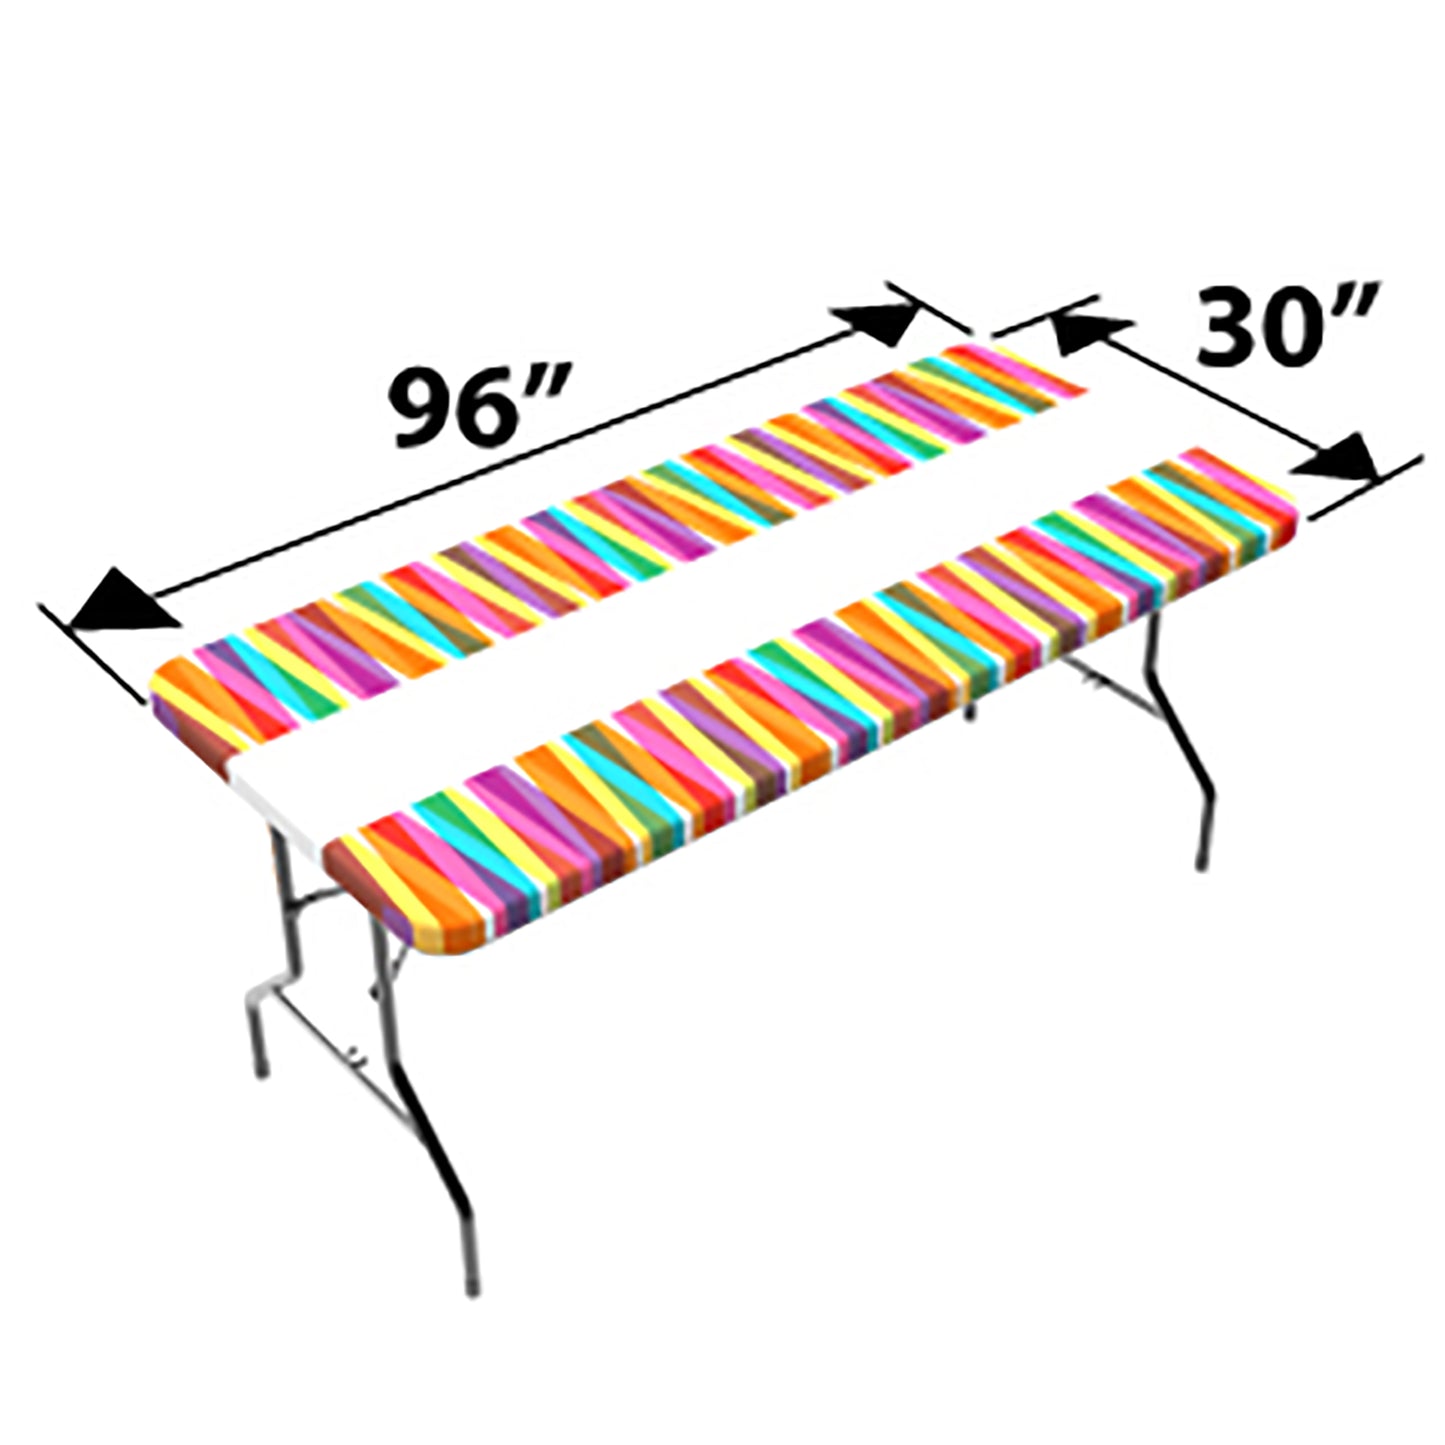 TableCloth PLUS 96" Laces Fitted Polyester Tablecloth for 8' Folding Tables dimensions